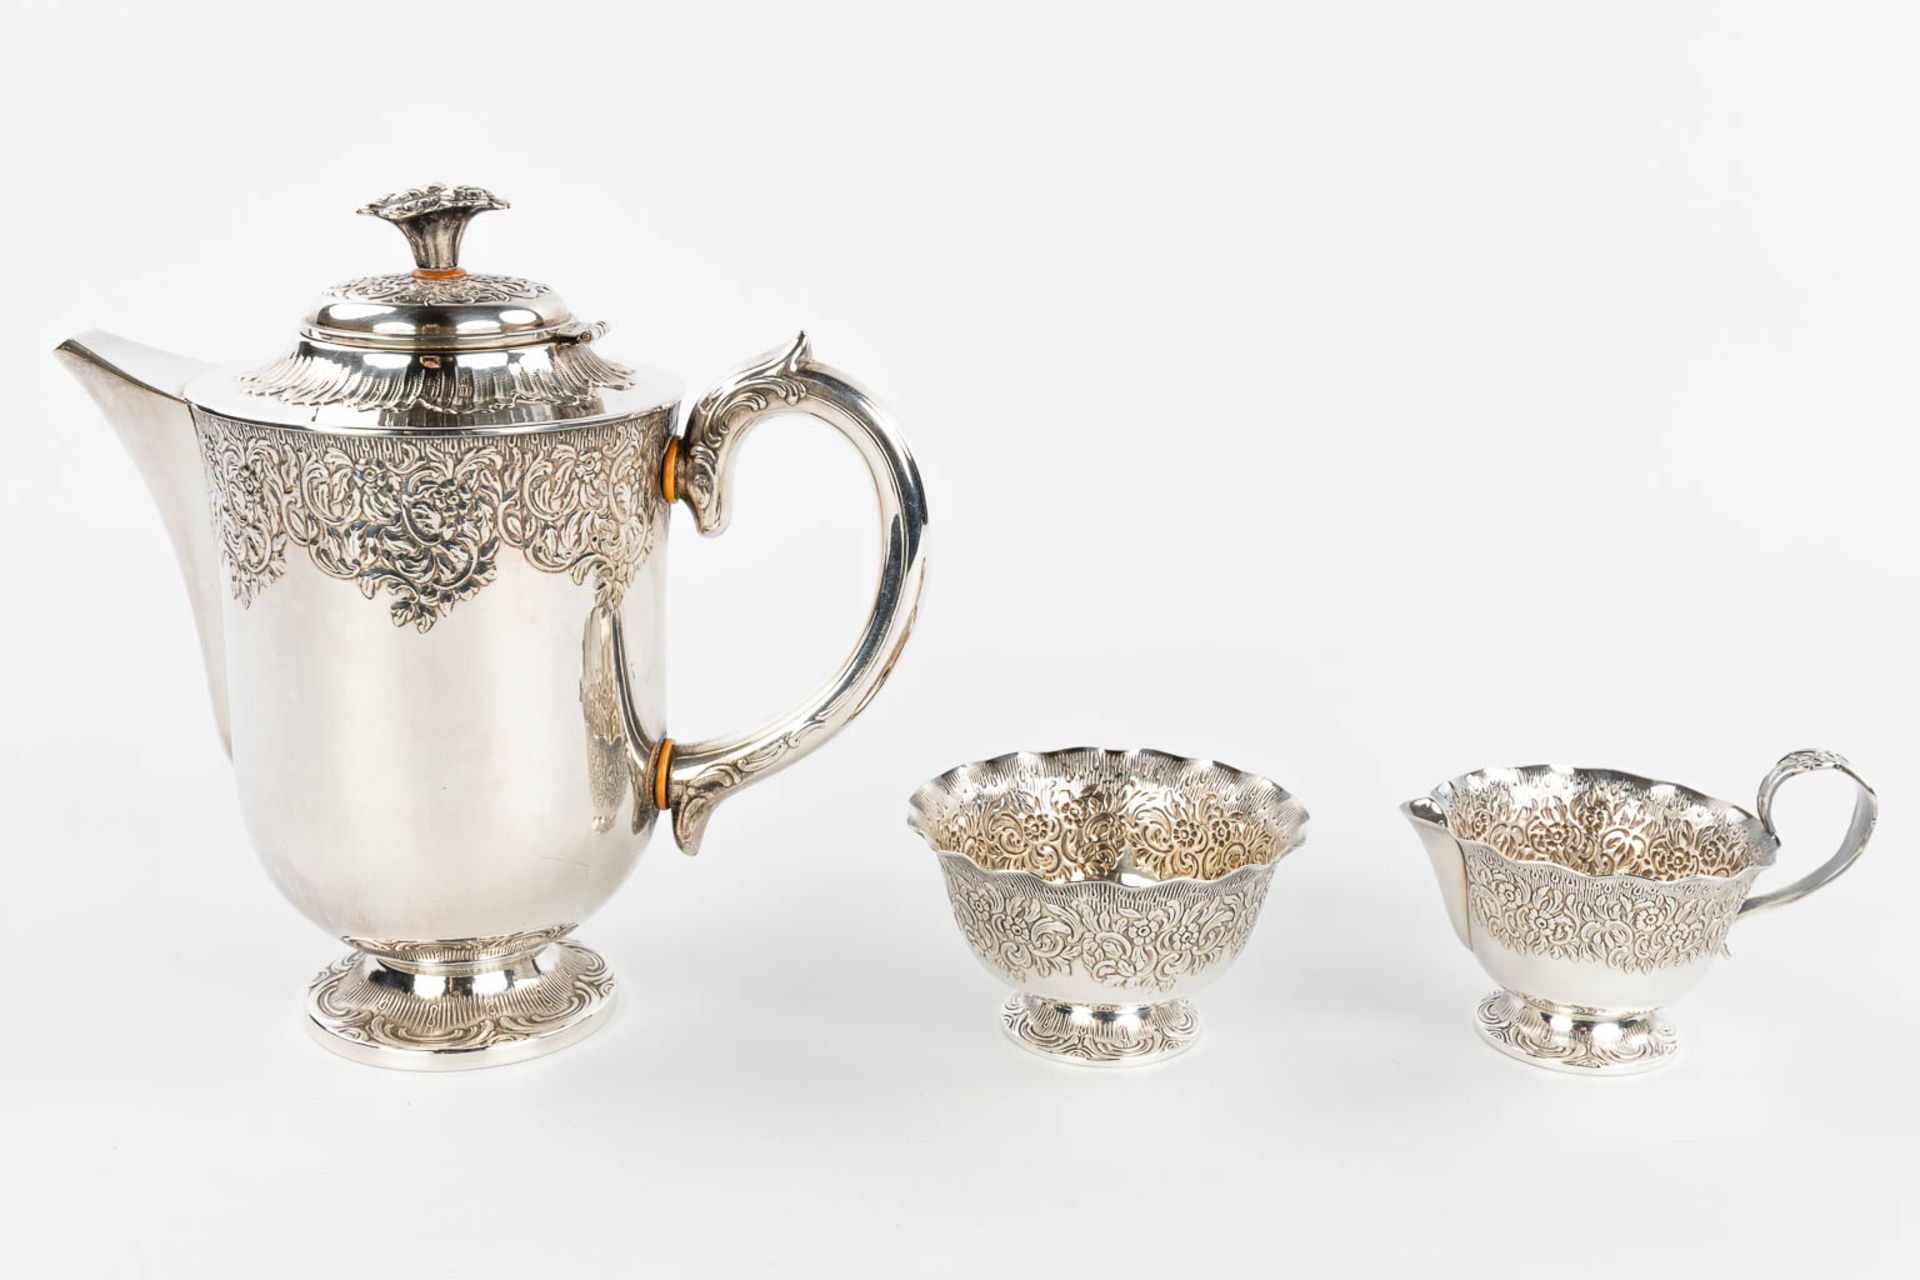 A silver-plated coffee service on a platter with sugar pot, coffee pot and milk jug. (H:22cm) - Image 6 of 18